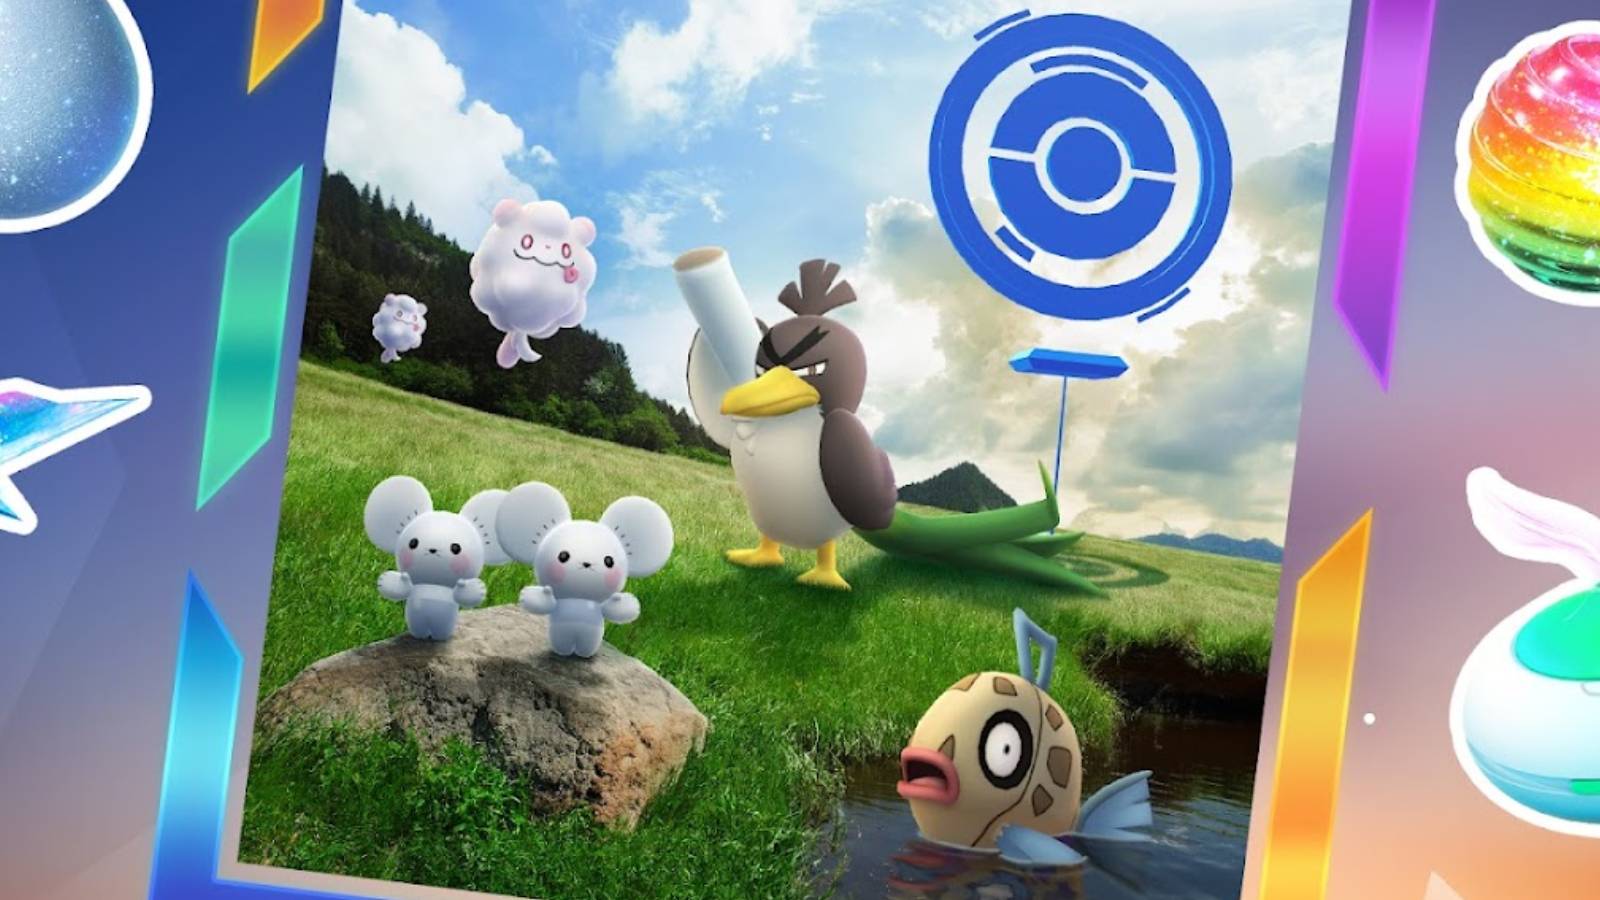 Key art shows several Pokemon that appear in the Grow Together premium timed research